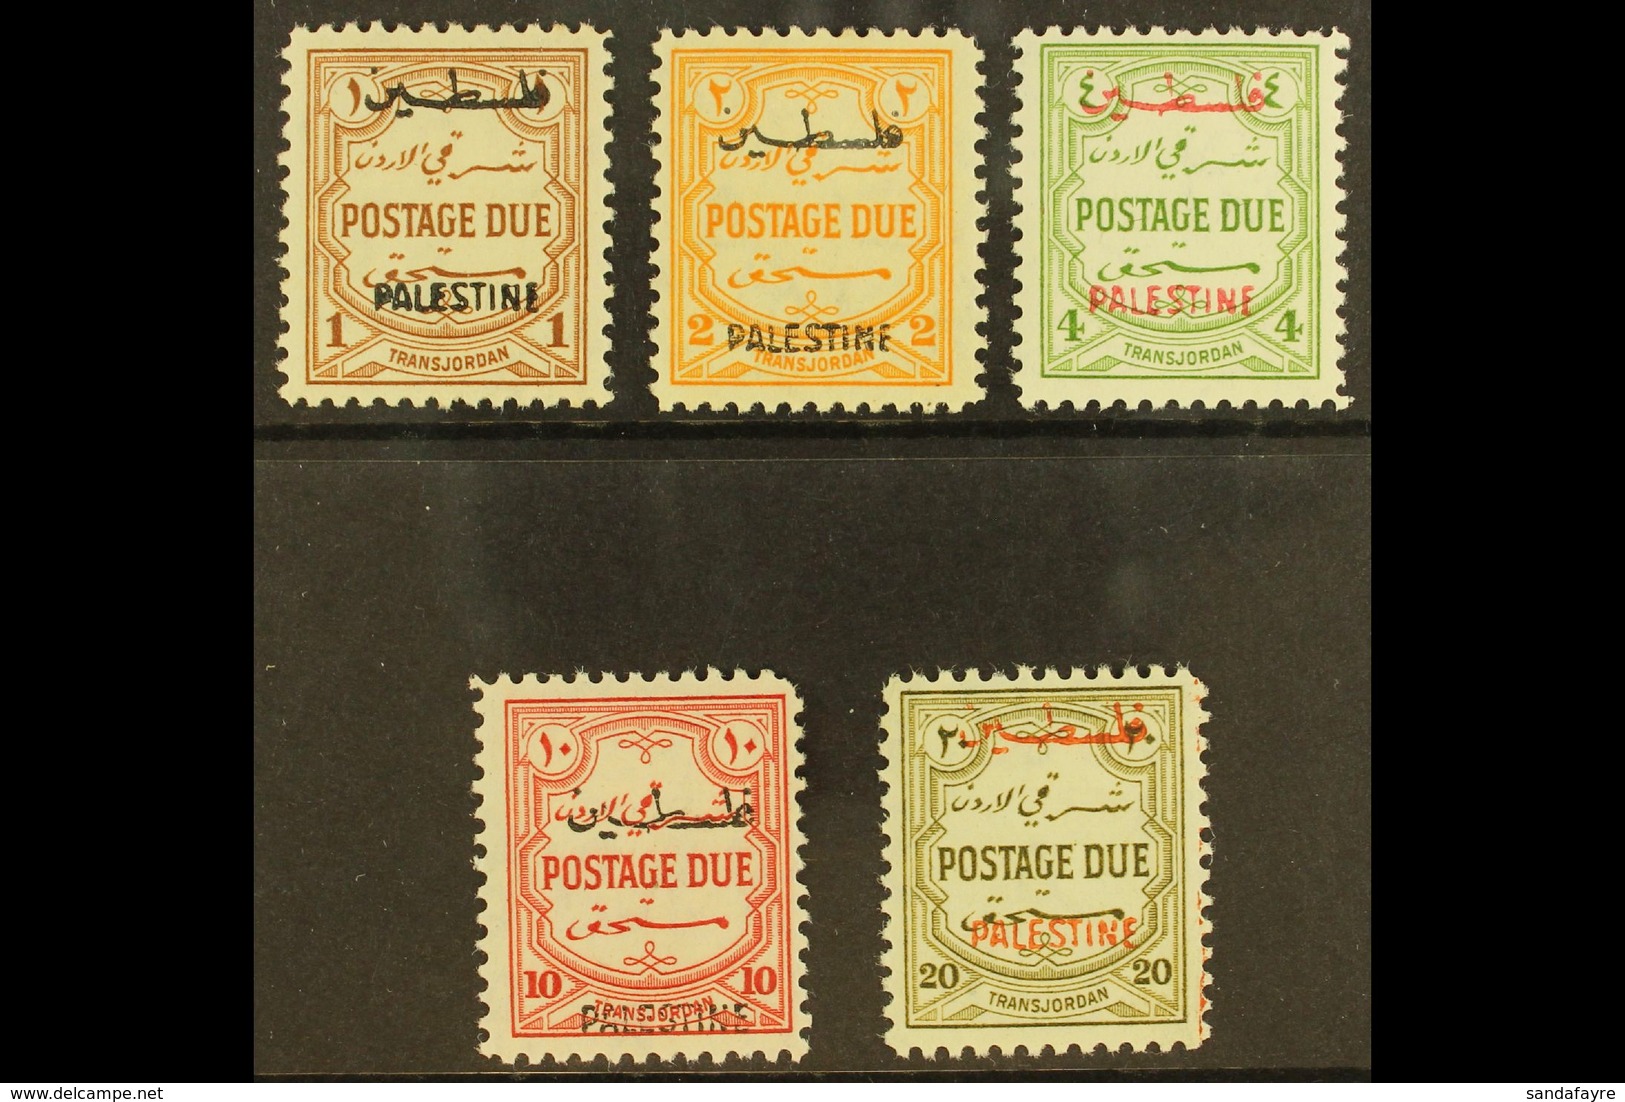 OCCUPATION OF PALESTINE  1948 Postage Due Set, Perf 12, Complete, SG PD25/9, Very Fine And Fresh Mint. (5 Stamps) For Mo - Jordanien